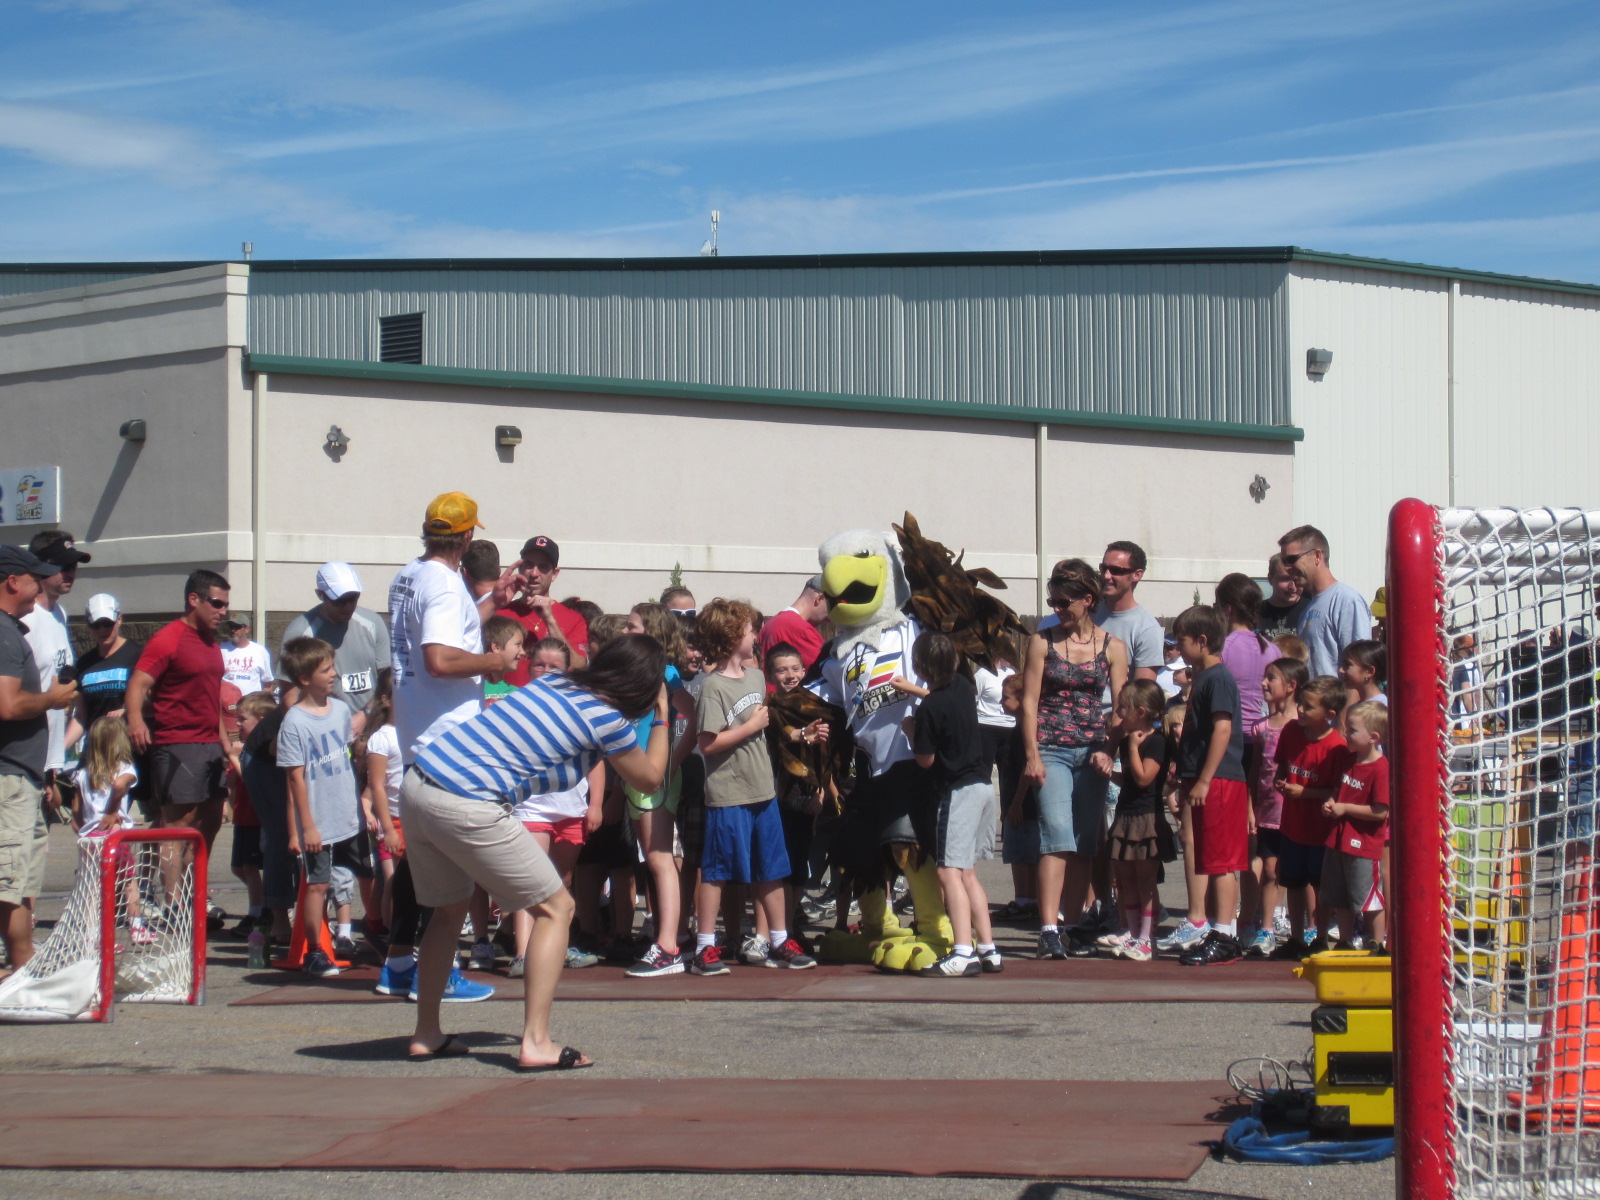 Lining up for the free kids run with the Colorado Eagles mascot in the center.